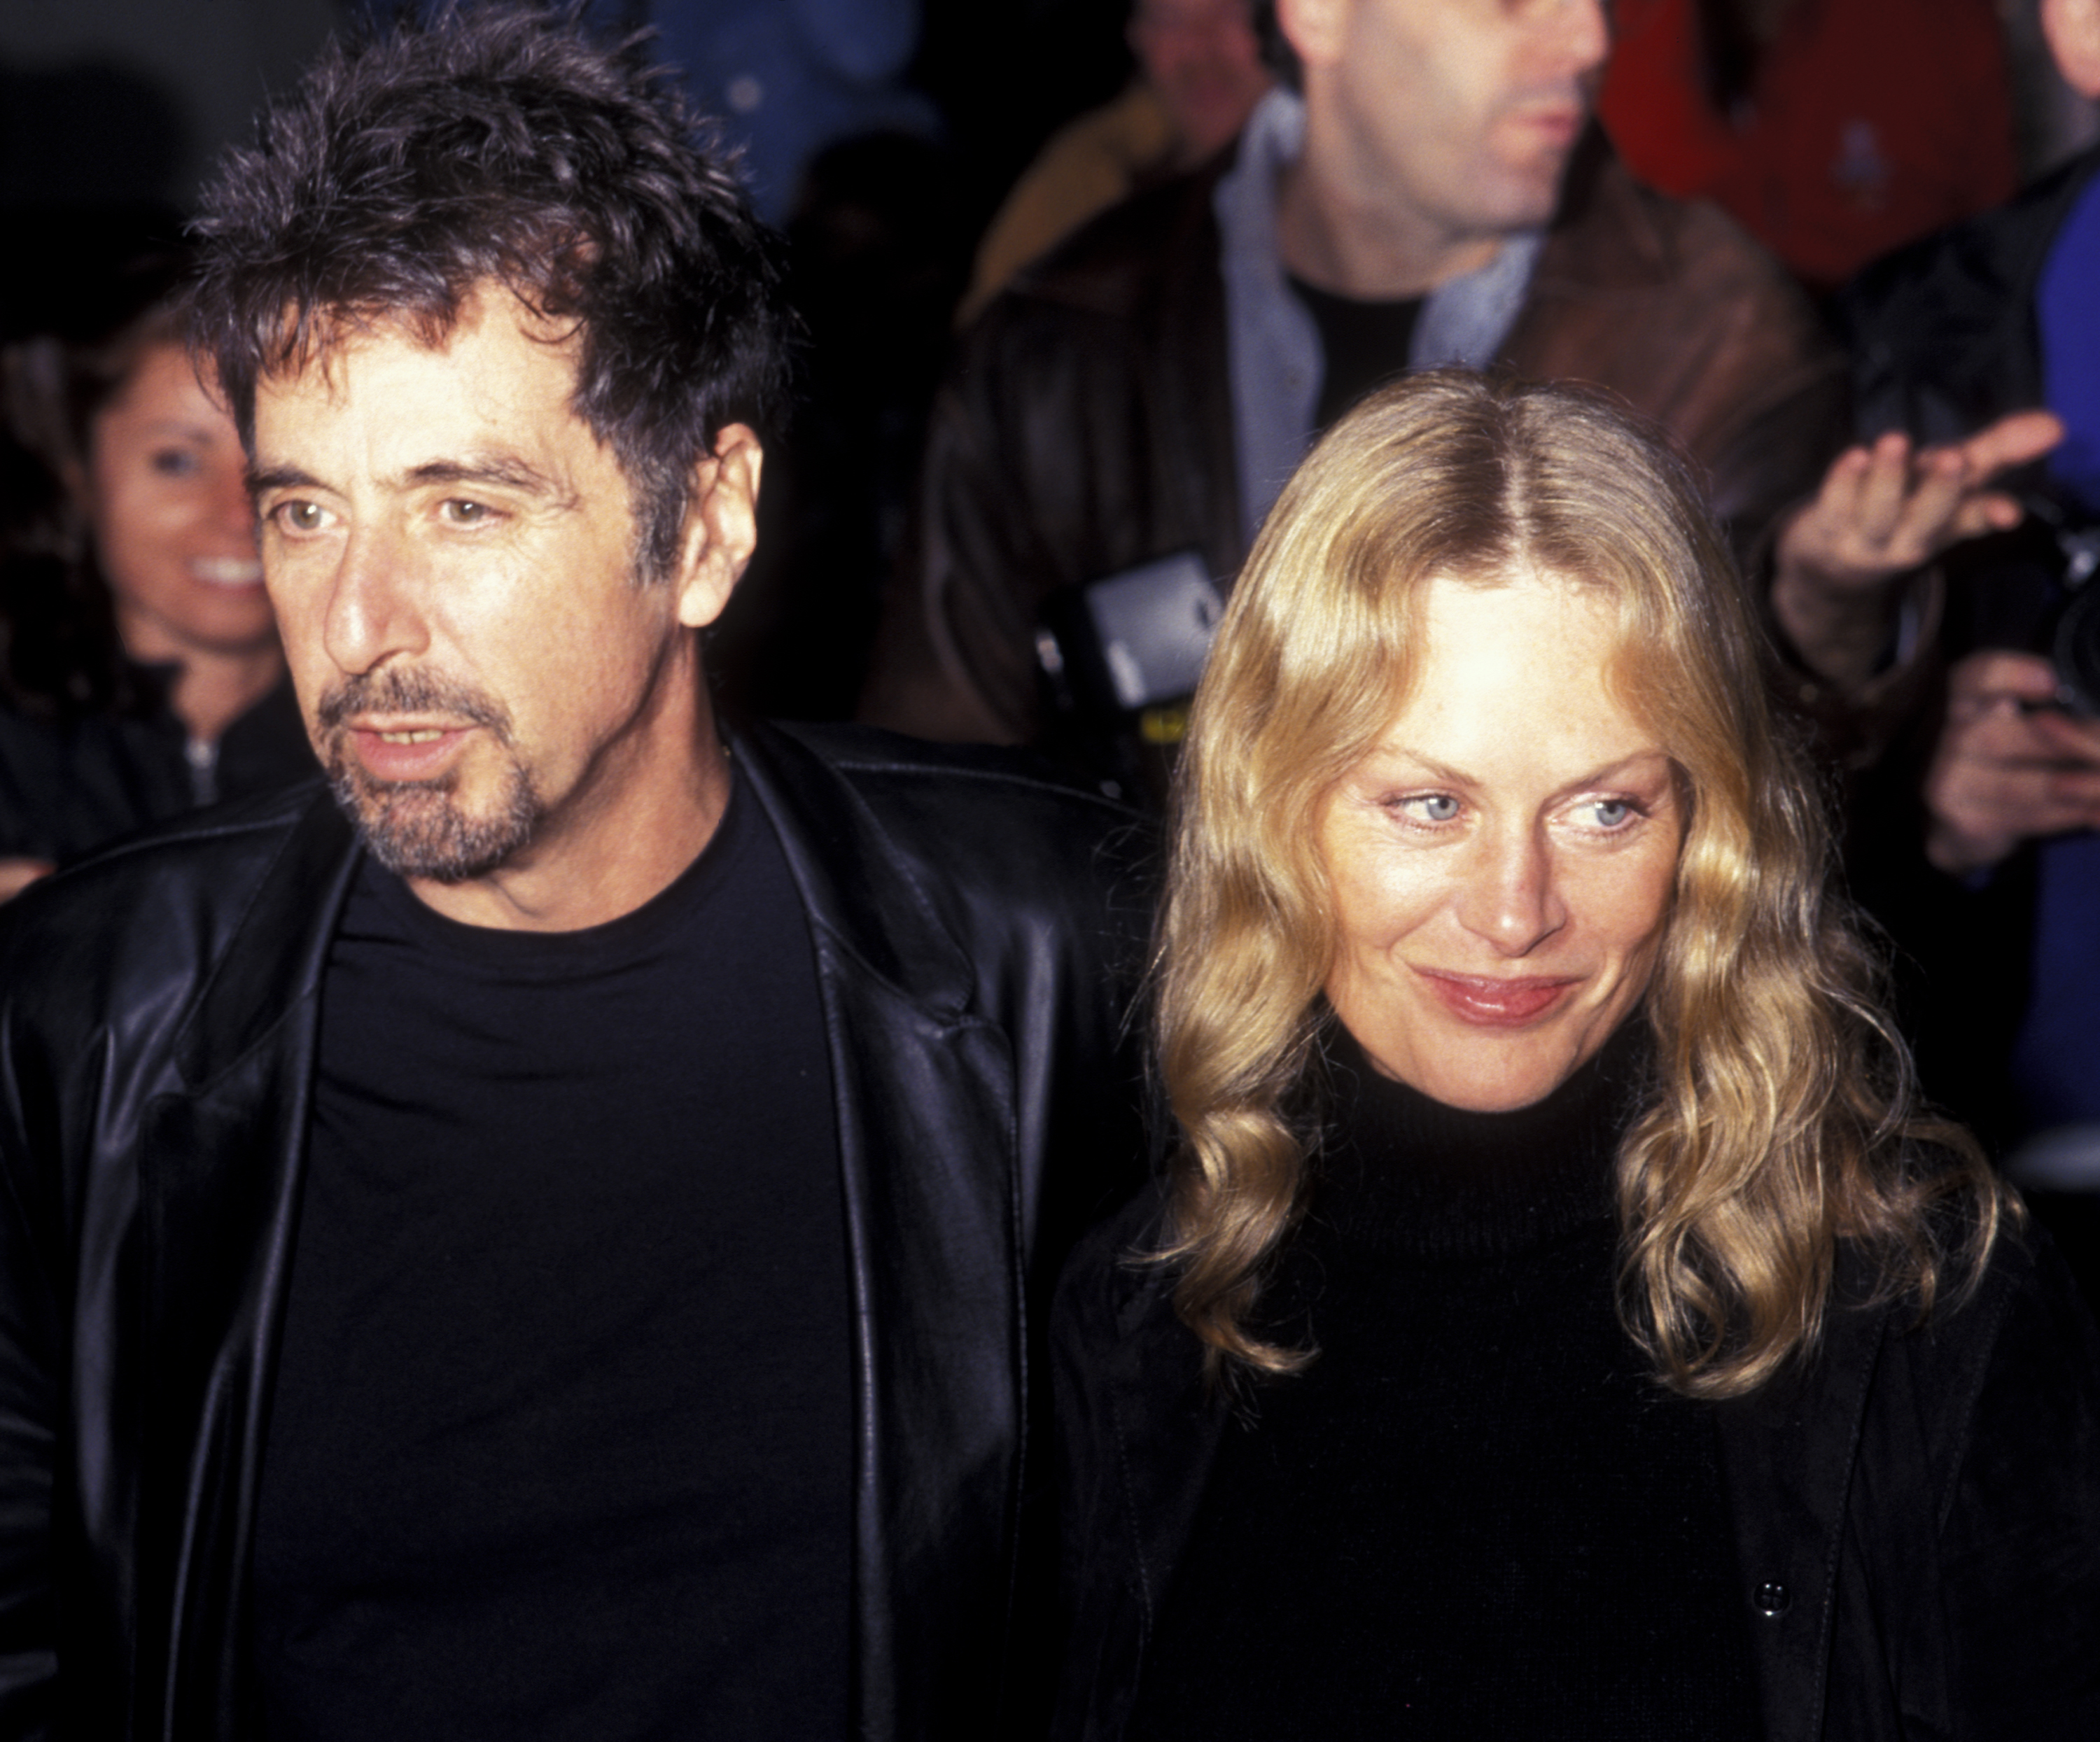 Al Pacino and Beverley D'Angelo at the "The Insiders" premiere party | Source: Getty Images